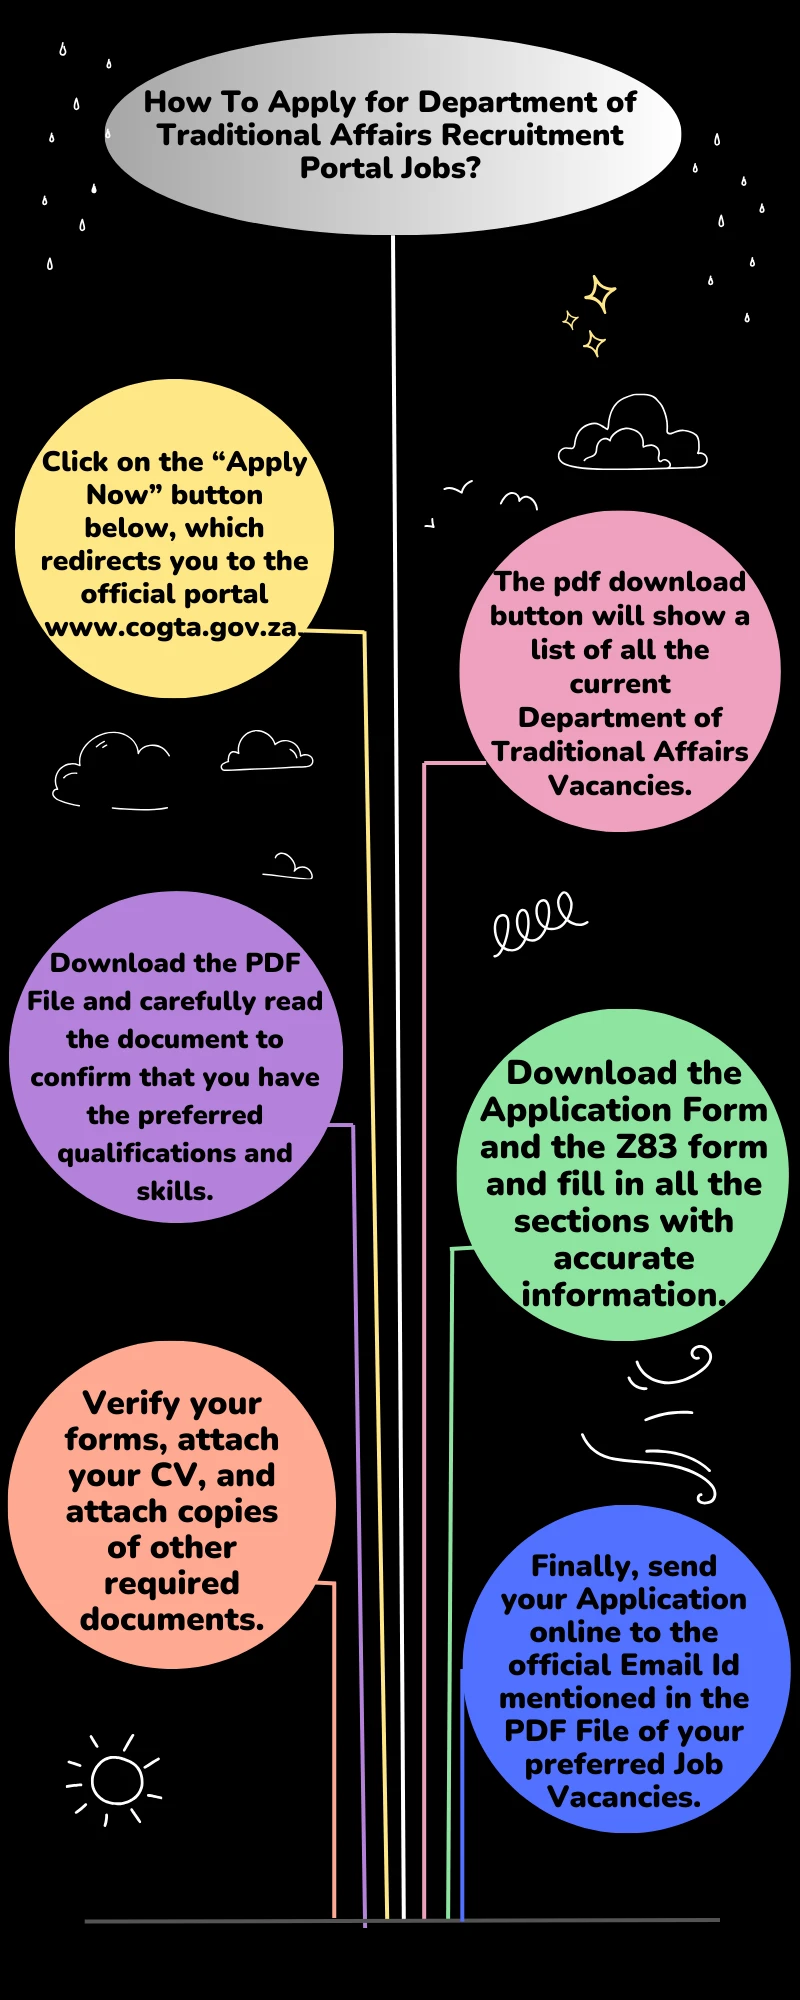 How To Apply for Department of Traditional Affairs Recruitment Portal Jobs?